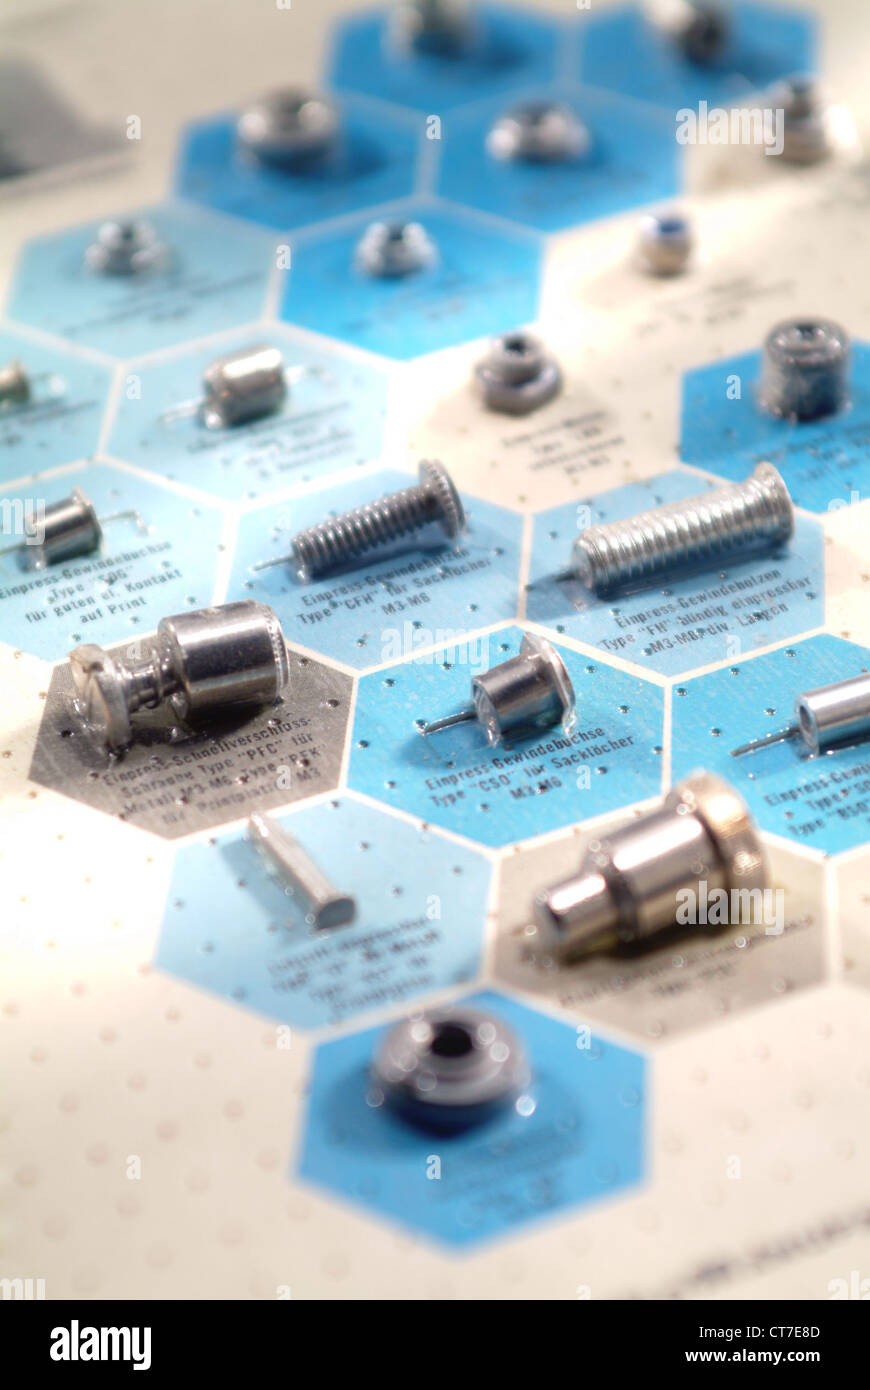 Fasteners made of metal Stock Photo